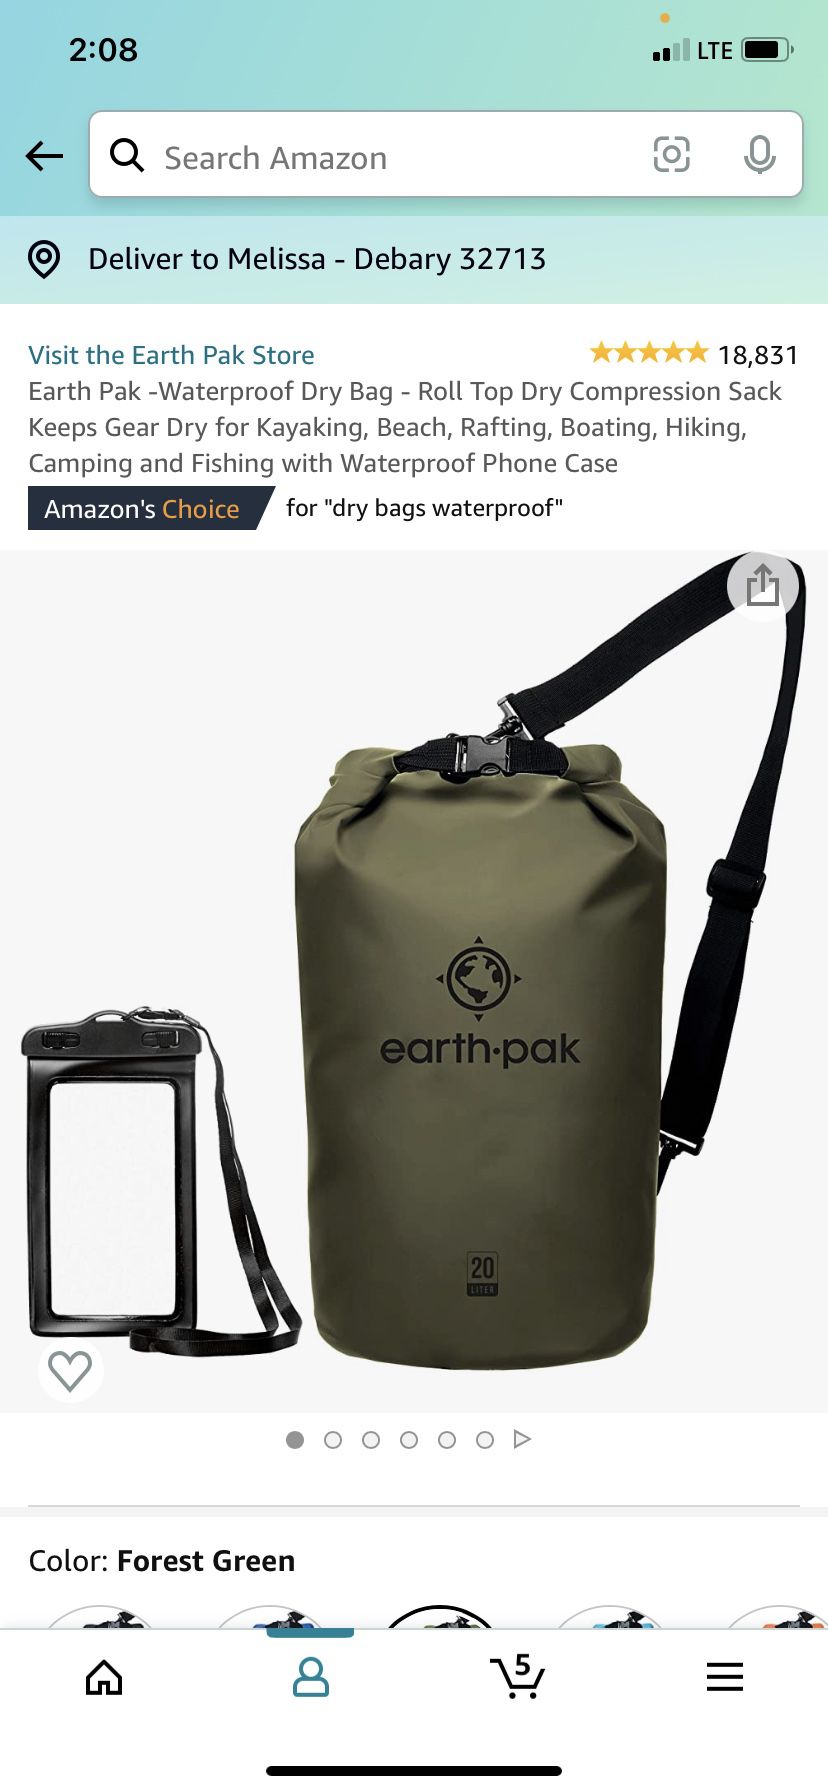 Earth Pak -Waterproof Dry Bag - Roll Top Dry Compression Sack Keeps Gear Dry for Kayaking, Beach, Rafting, Boating, Hiking, Camping and Fishing with W